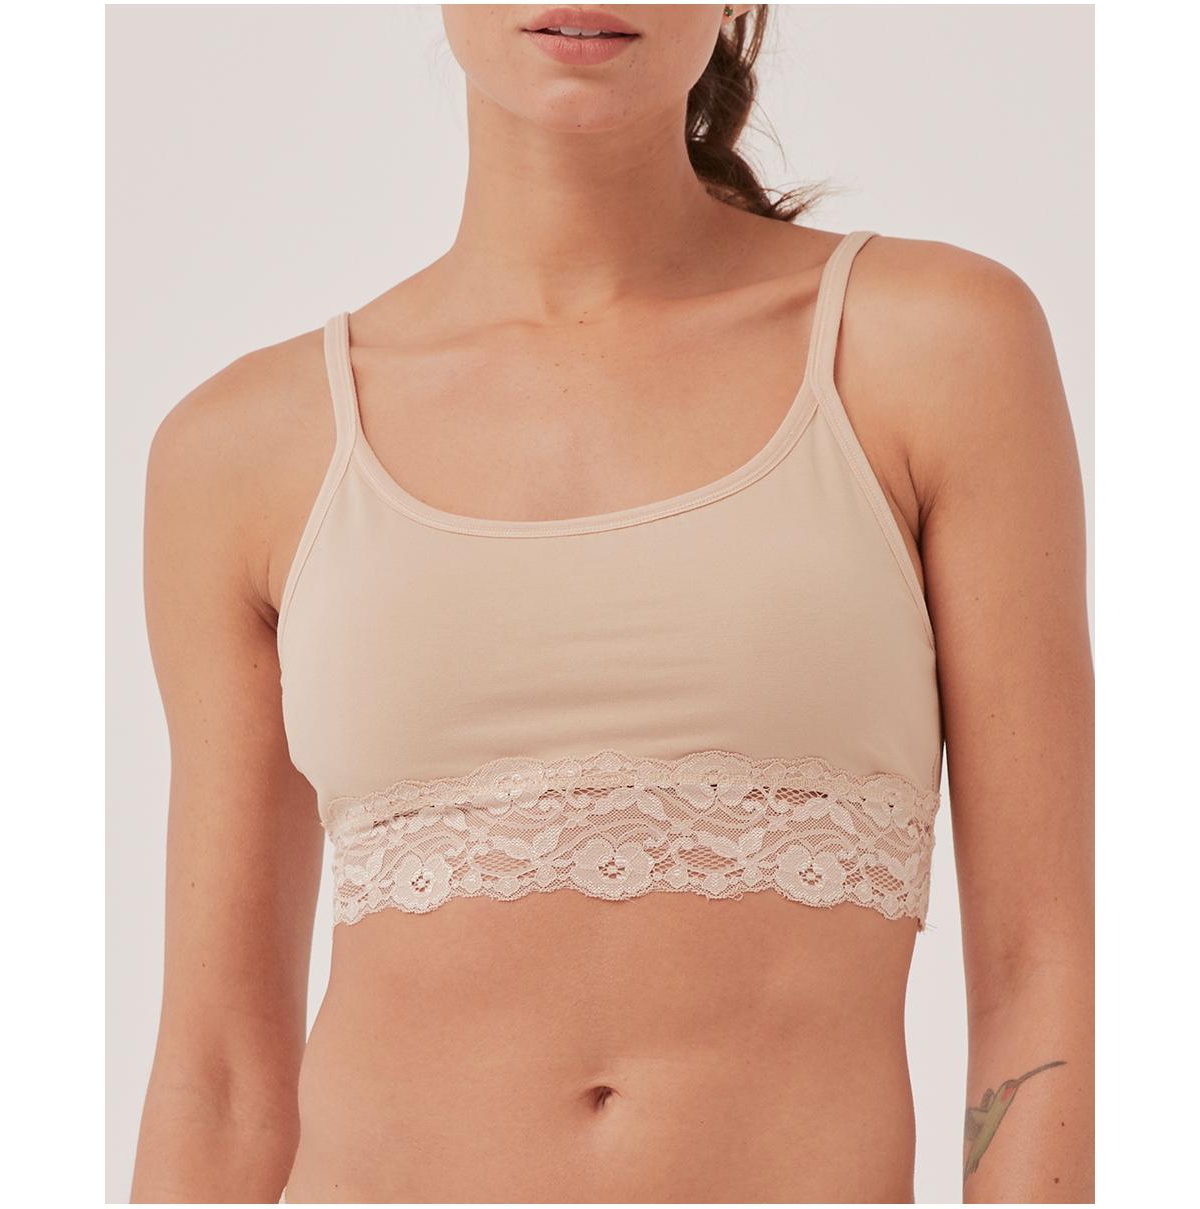 Pact Women's Organic Cotton Lace Smooth Cup Bralette